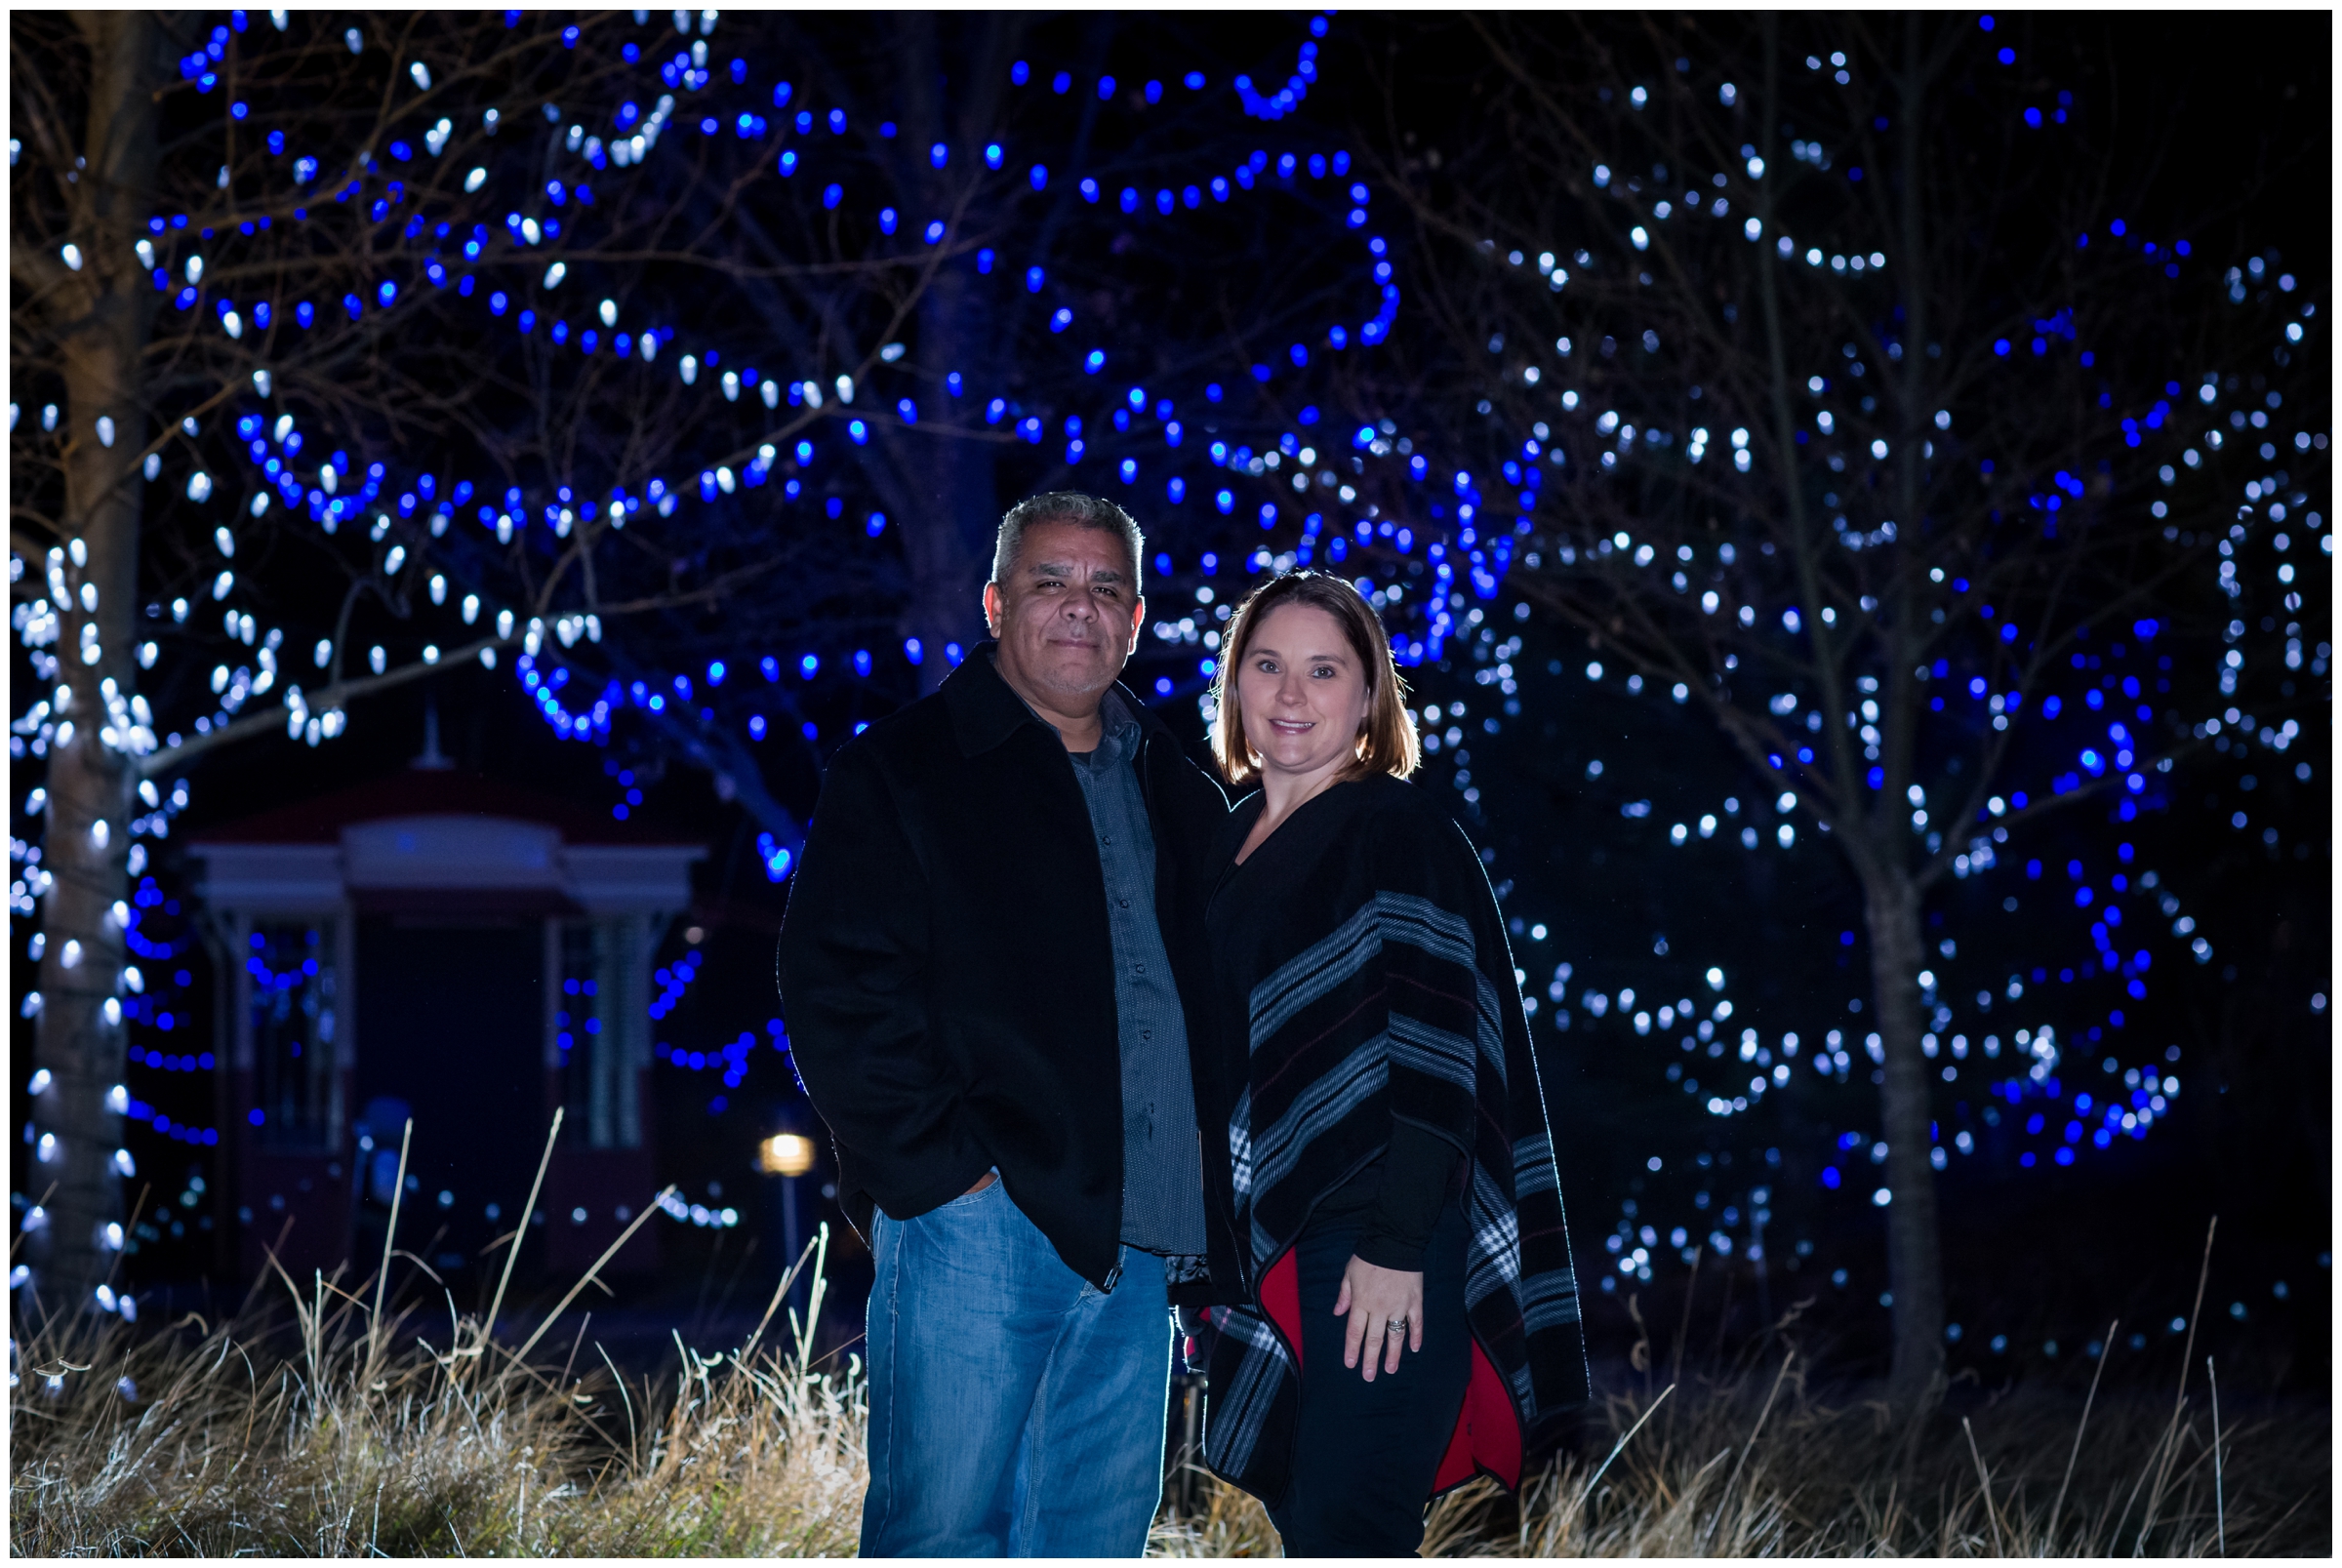 nighttime holiday lights family photography session in Colorado 